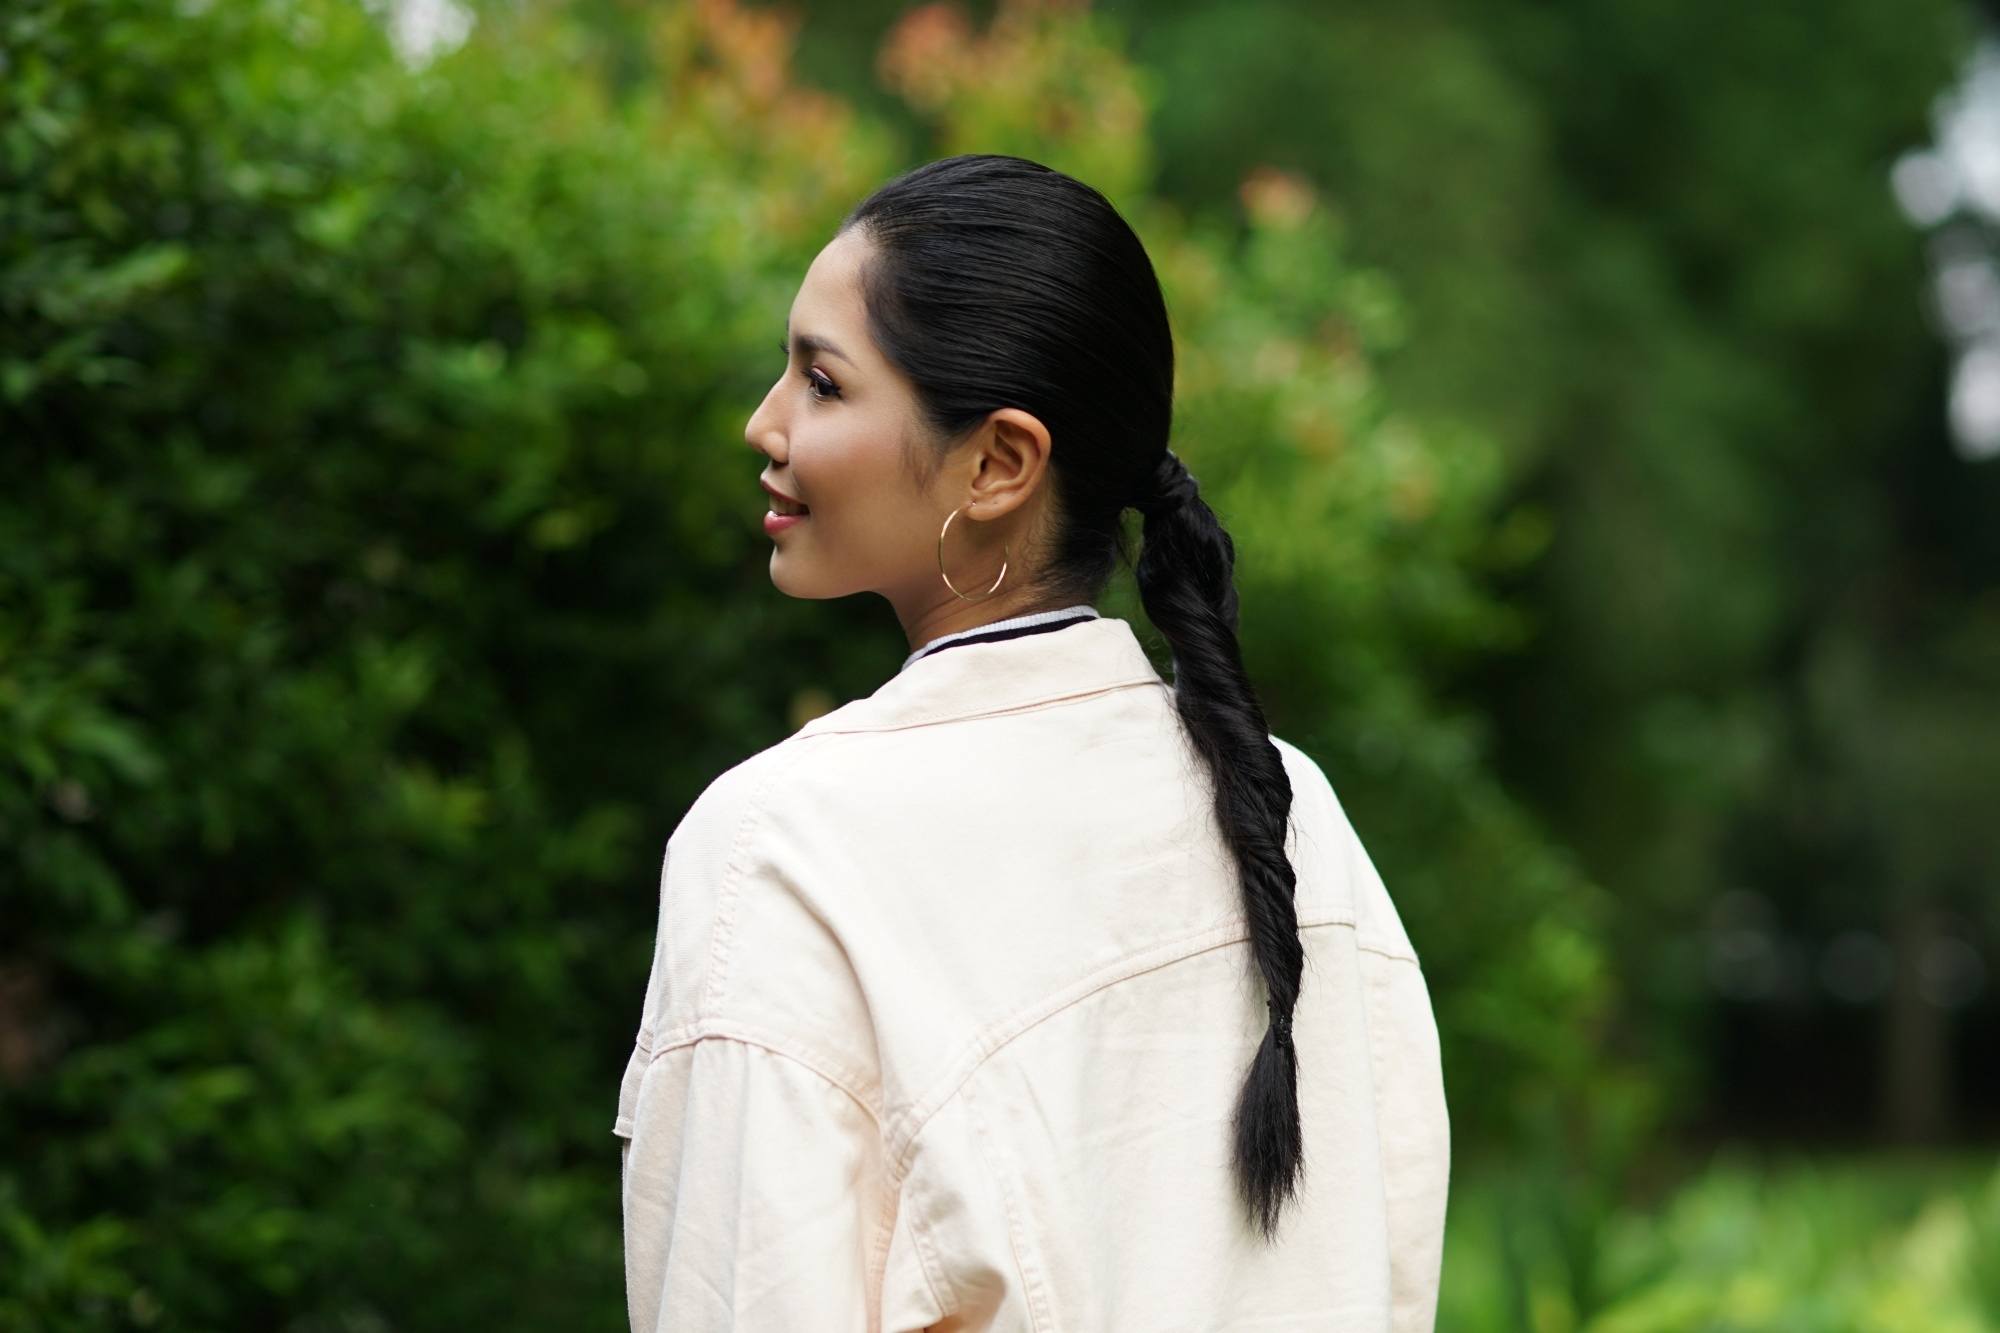 Asian woman with long black hair wearing a white jacket outdoors